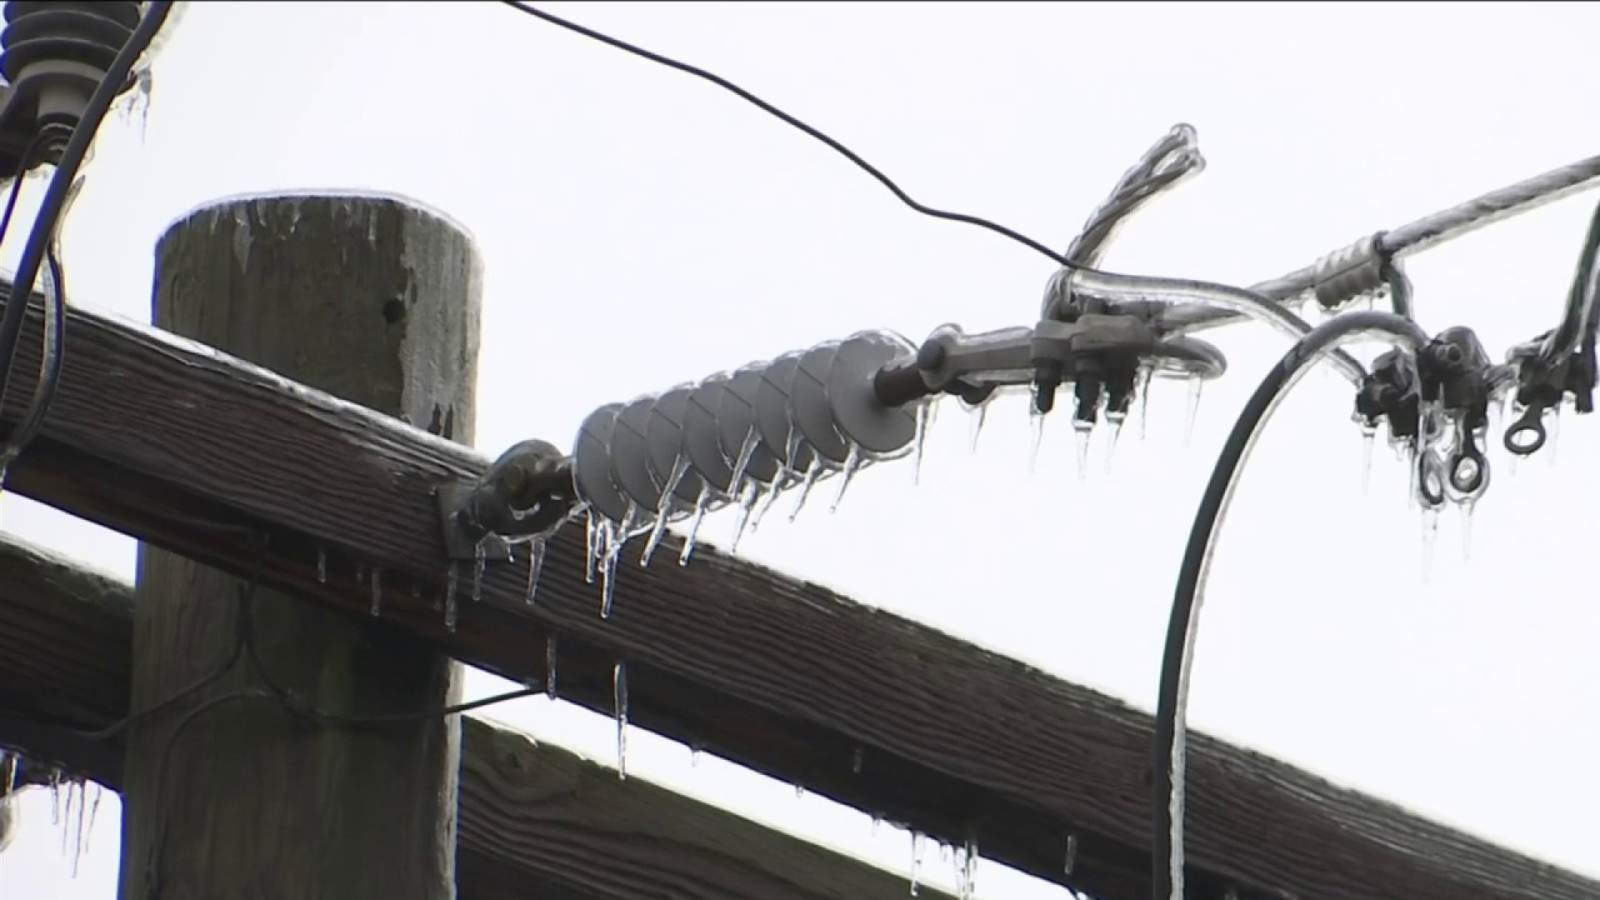 Most customers are subject to rotating interruptions as winter weather continues